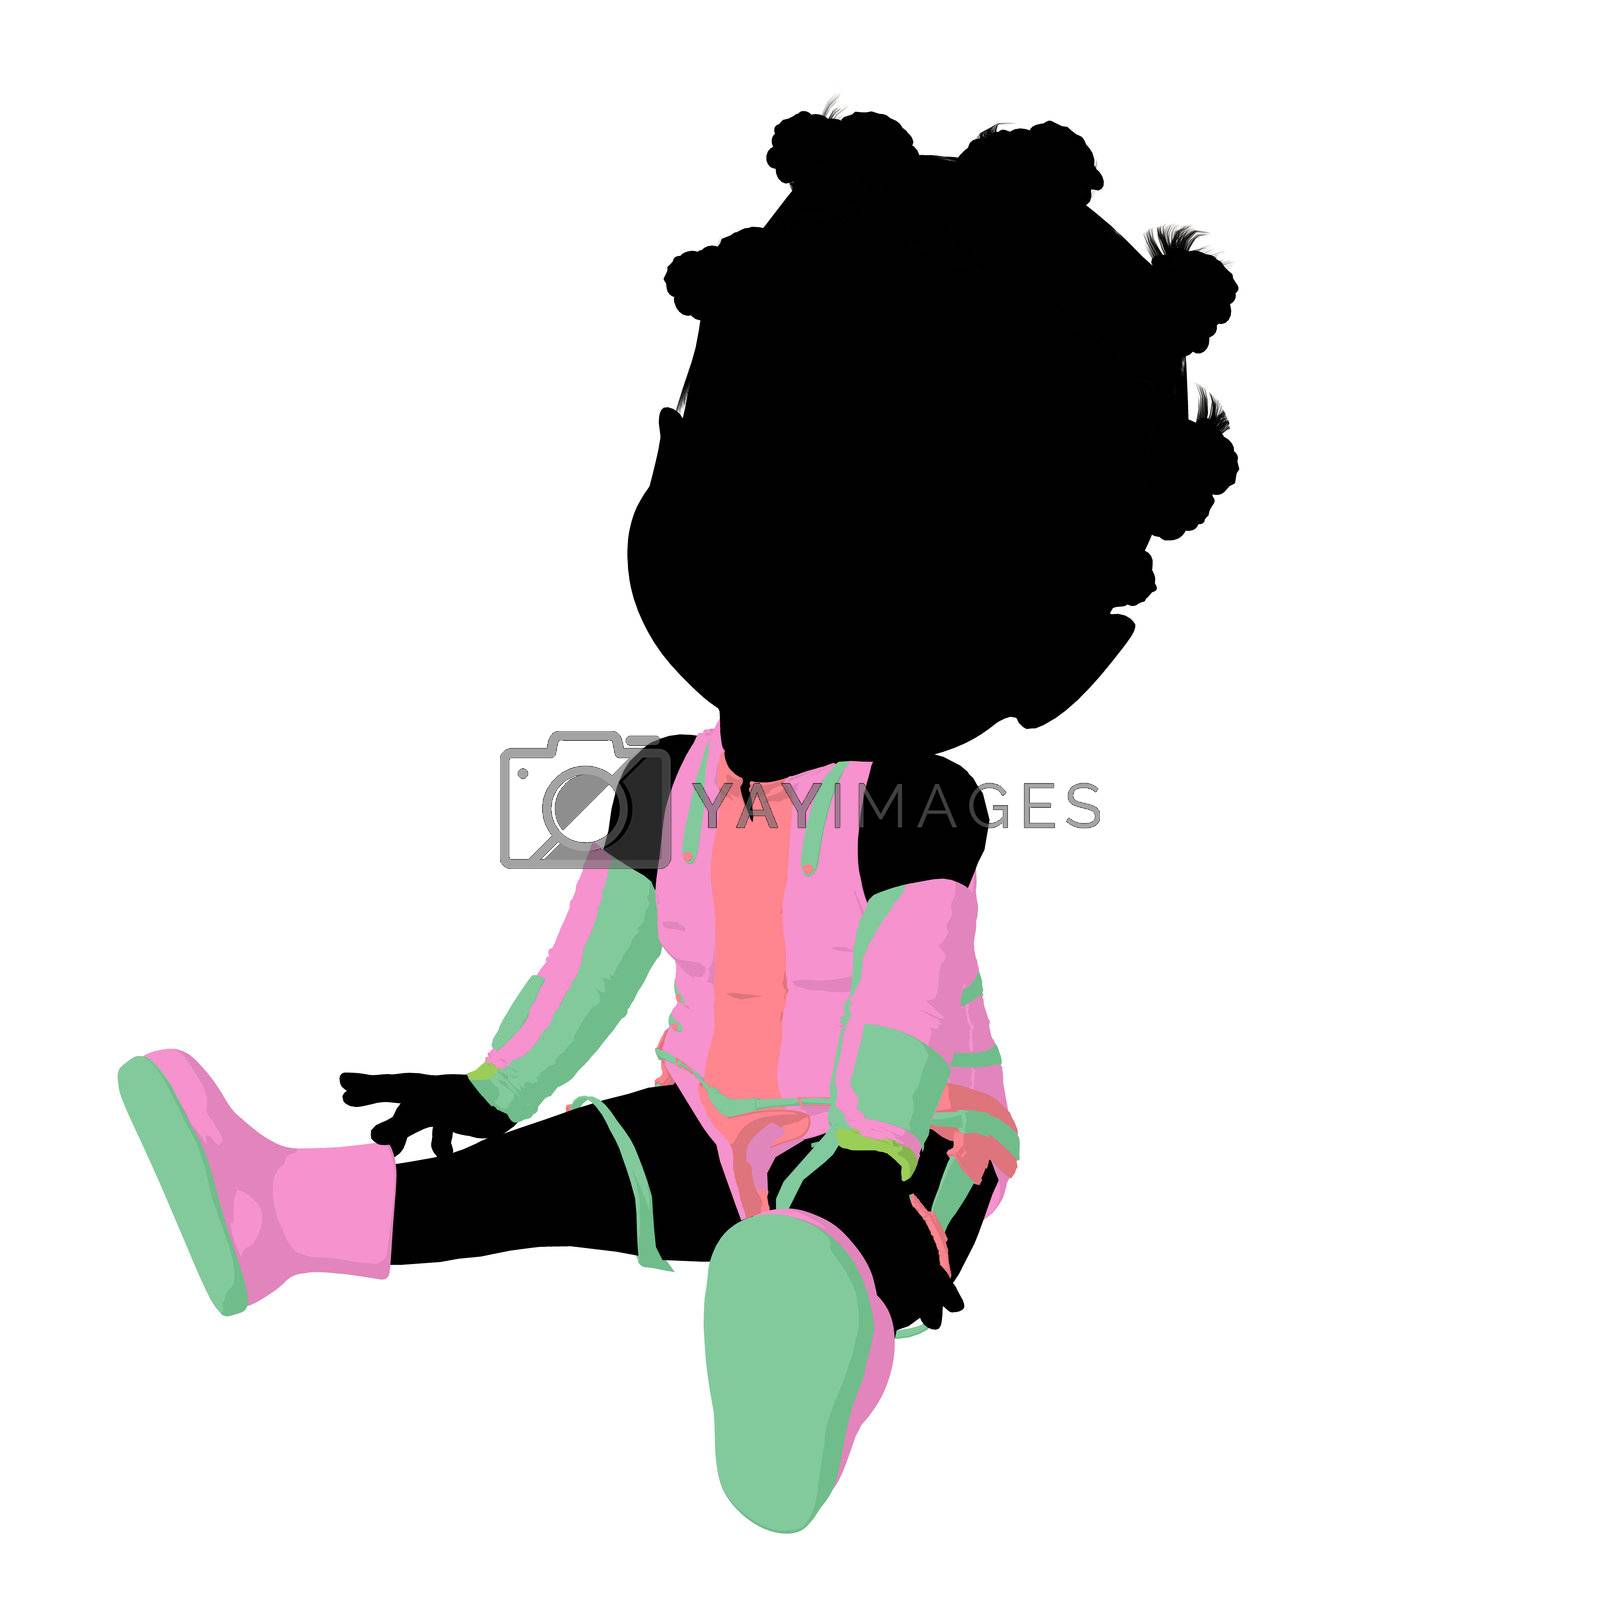 Royalty free image of Little African American Sci Fi Girl Illustration Silhouette by kathygold